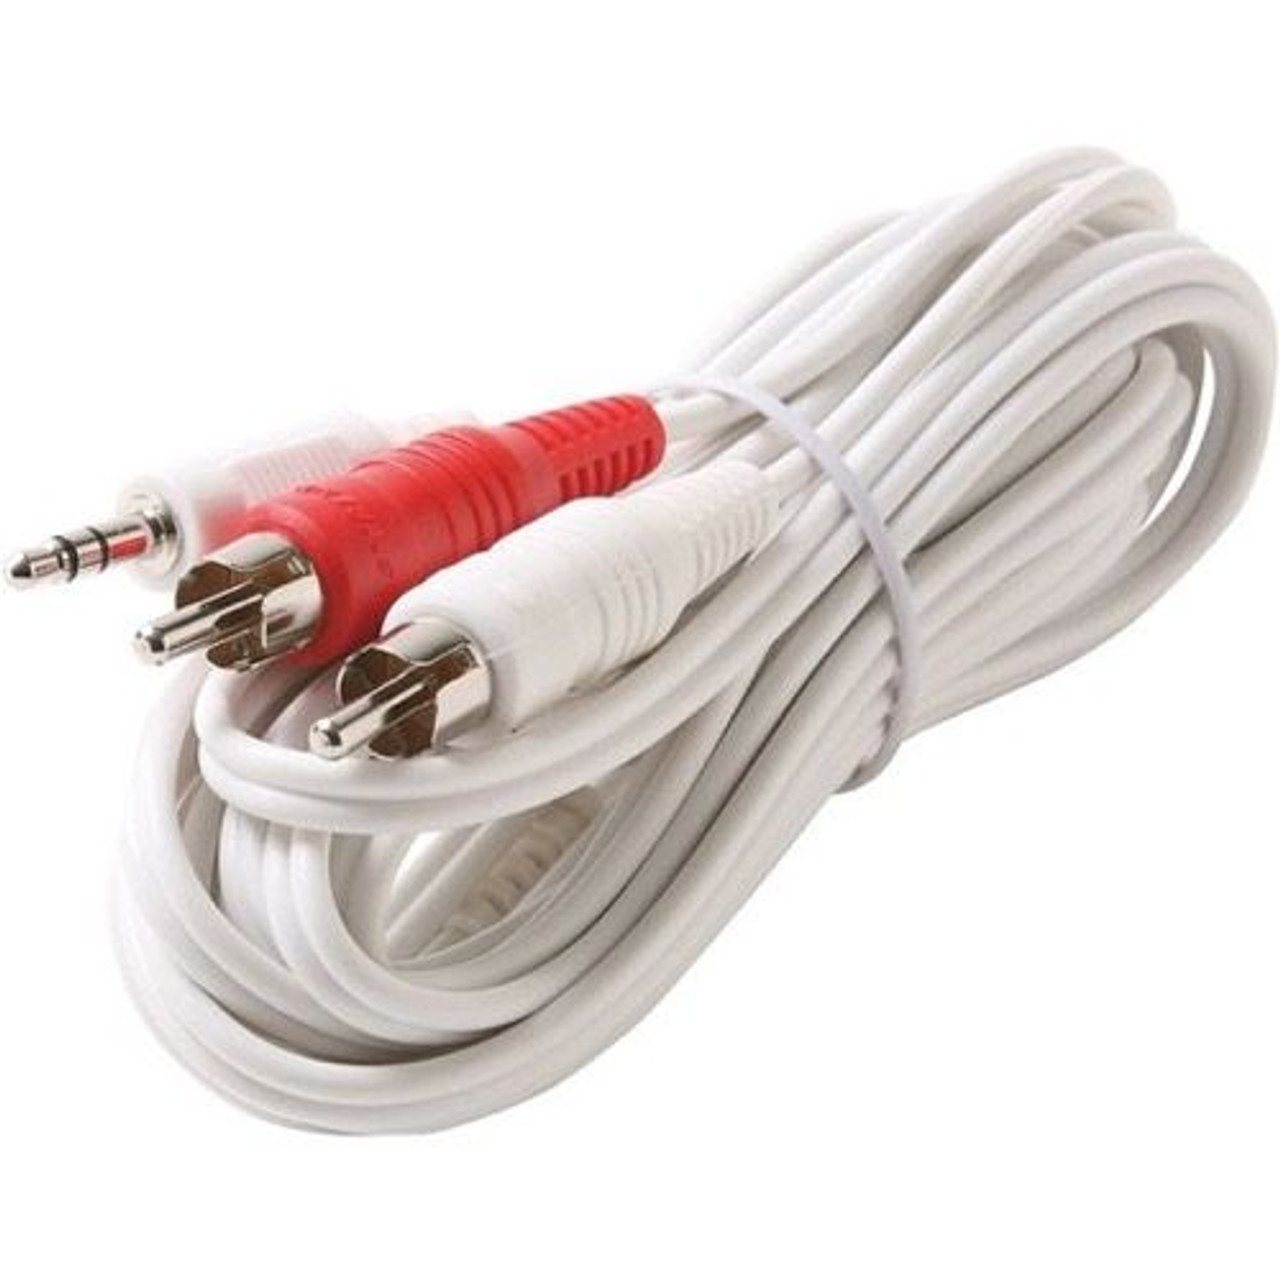 Eagle 6' FT 2 RCA Plug Male to 3.5mm Male plug Stereo Cable iPod White Y Splitter Cable White Stereo 3.5mm Male to Dual RCA Male Adapter Plug Shielded Audio Adapter Cable